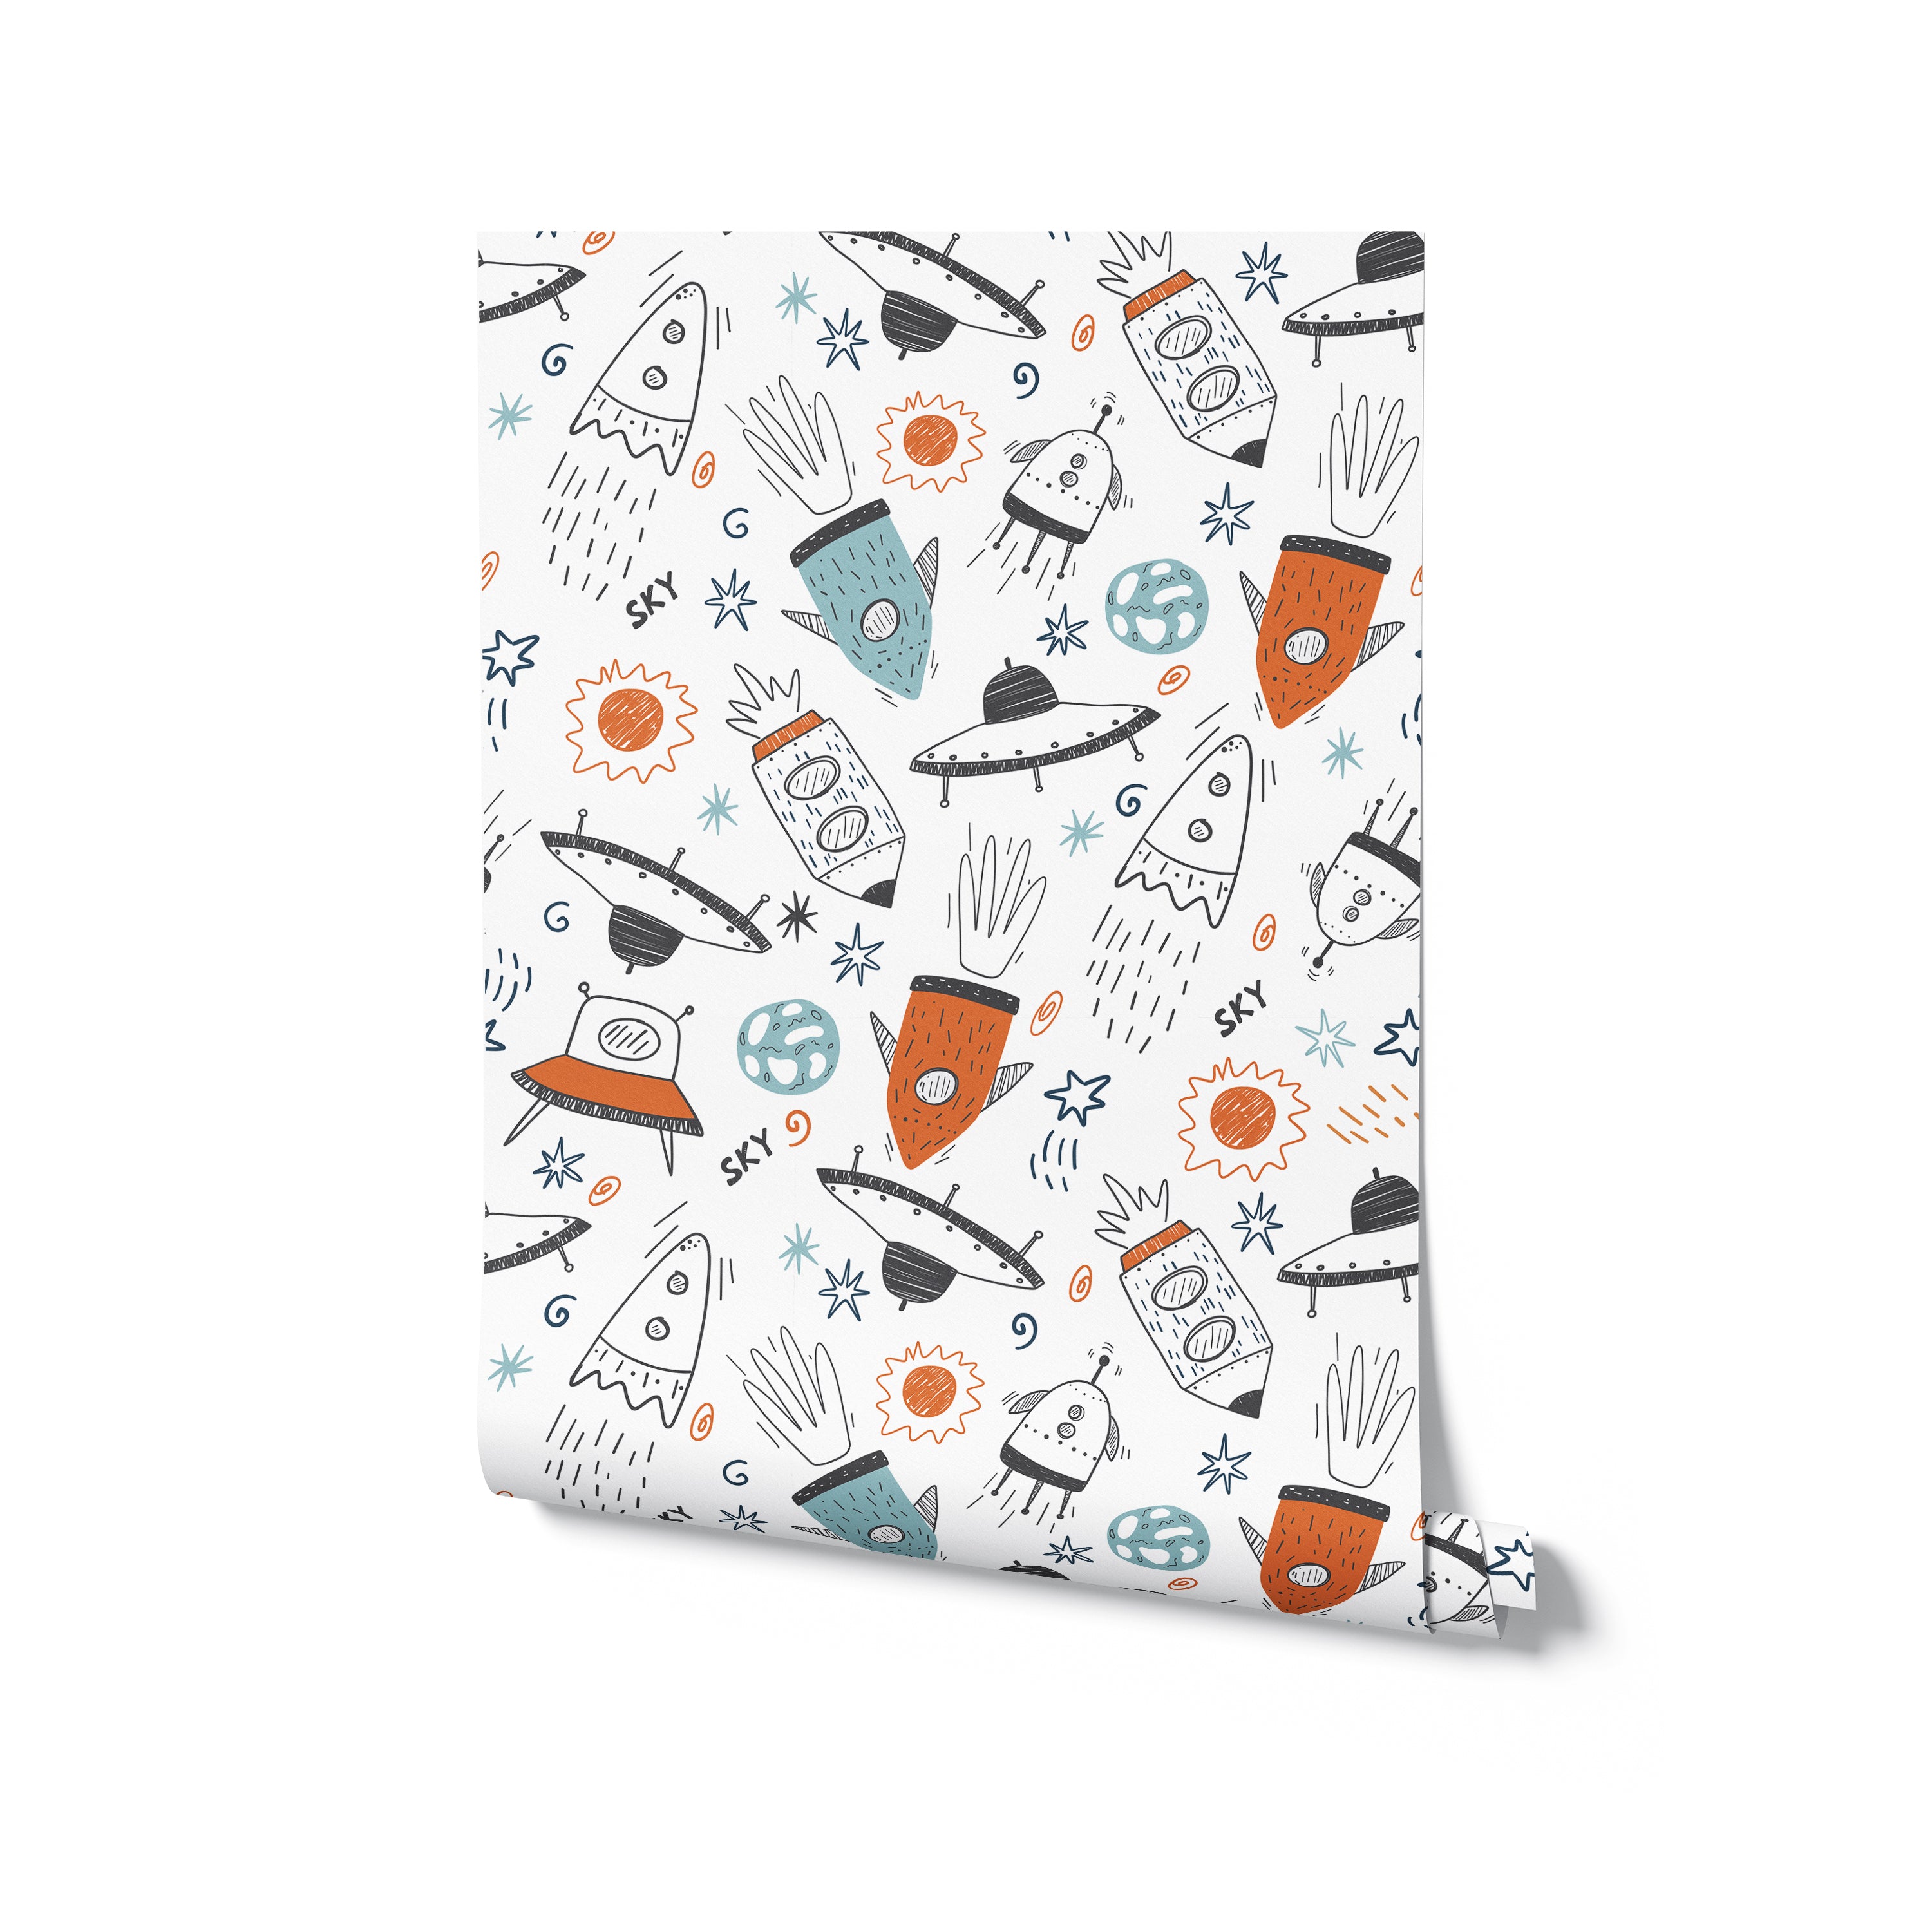 A rolled piece of wallpaper with a playful space theme, featuring doodles of rockets, planets, satellites, and stars in a whimsical style with soft colors on a white background